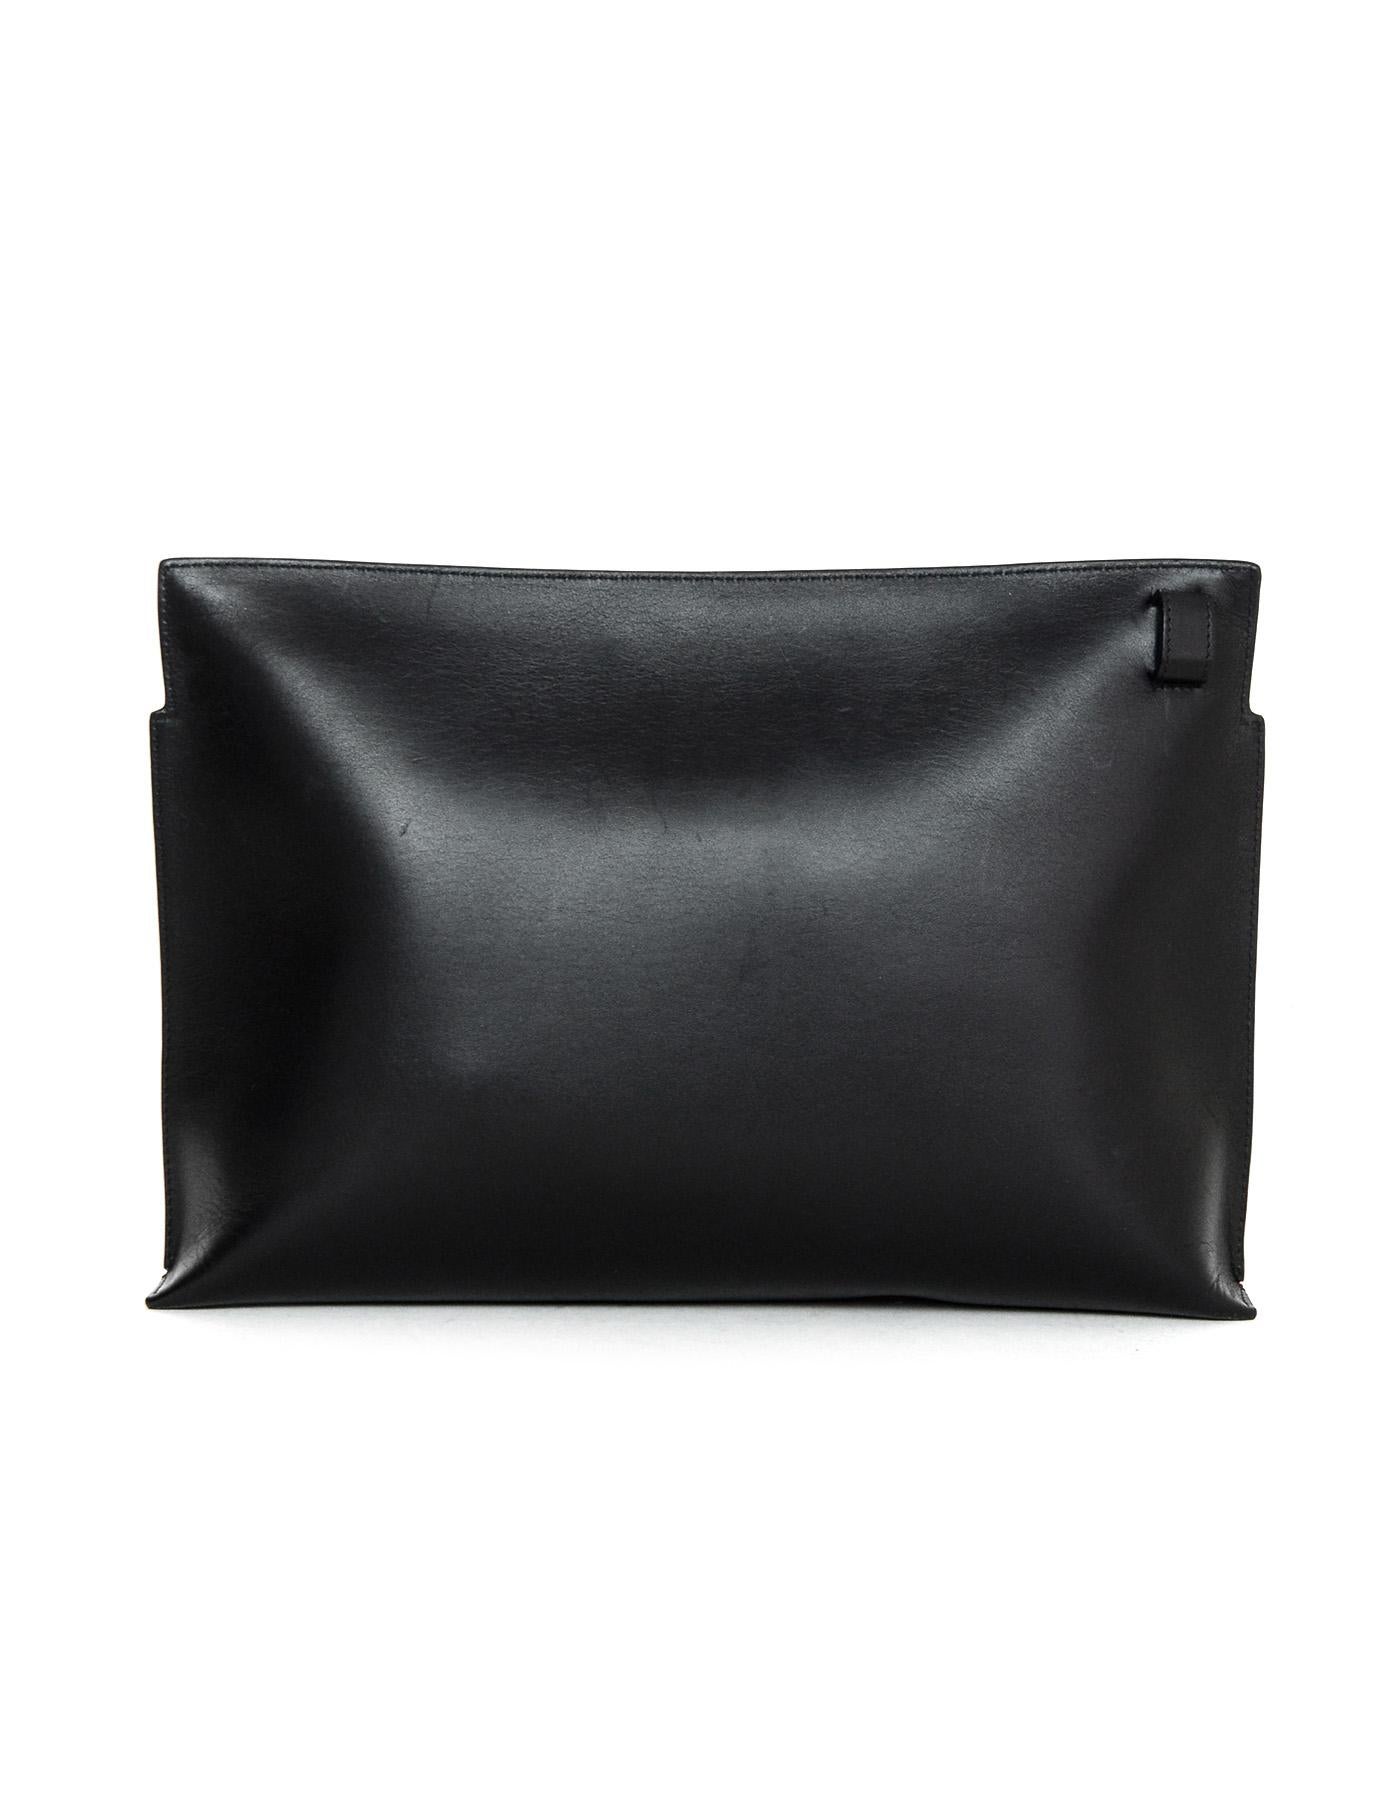 Loewe Multicolor Leather T-Pouch Clutch

Made In: Spain
Color: Multicolor-red, white, black, yellow, purple, blue, orange
Hardware: Goldtone
Materials: Leather
Lining: Black textile
Closure/Opening: Zip top
Exterior Pockets: None
Interior Pockets: